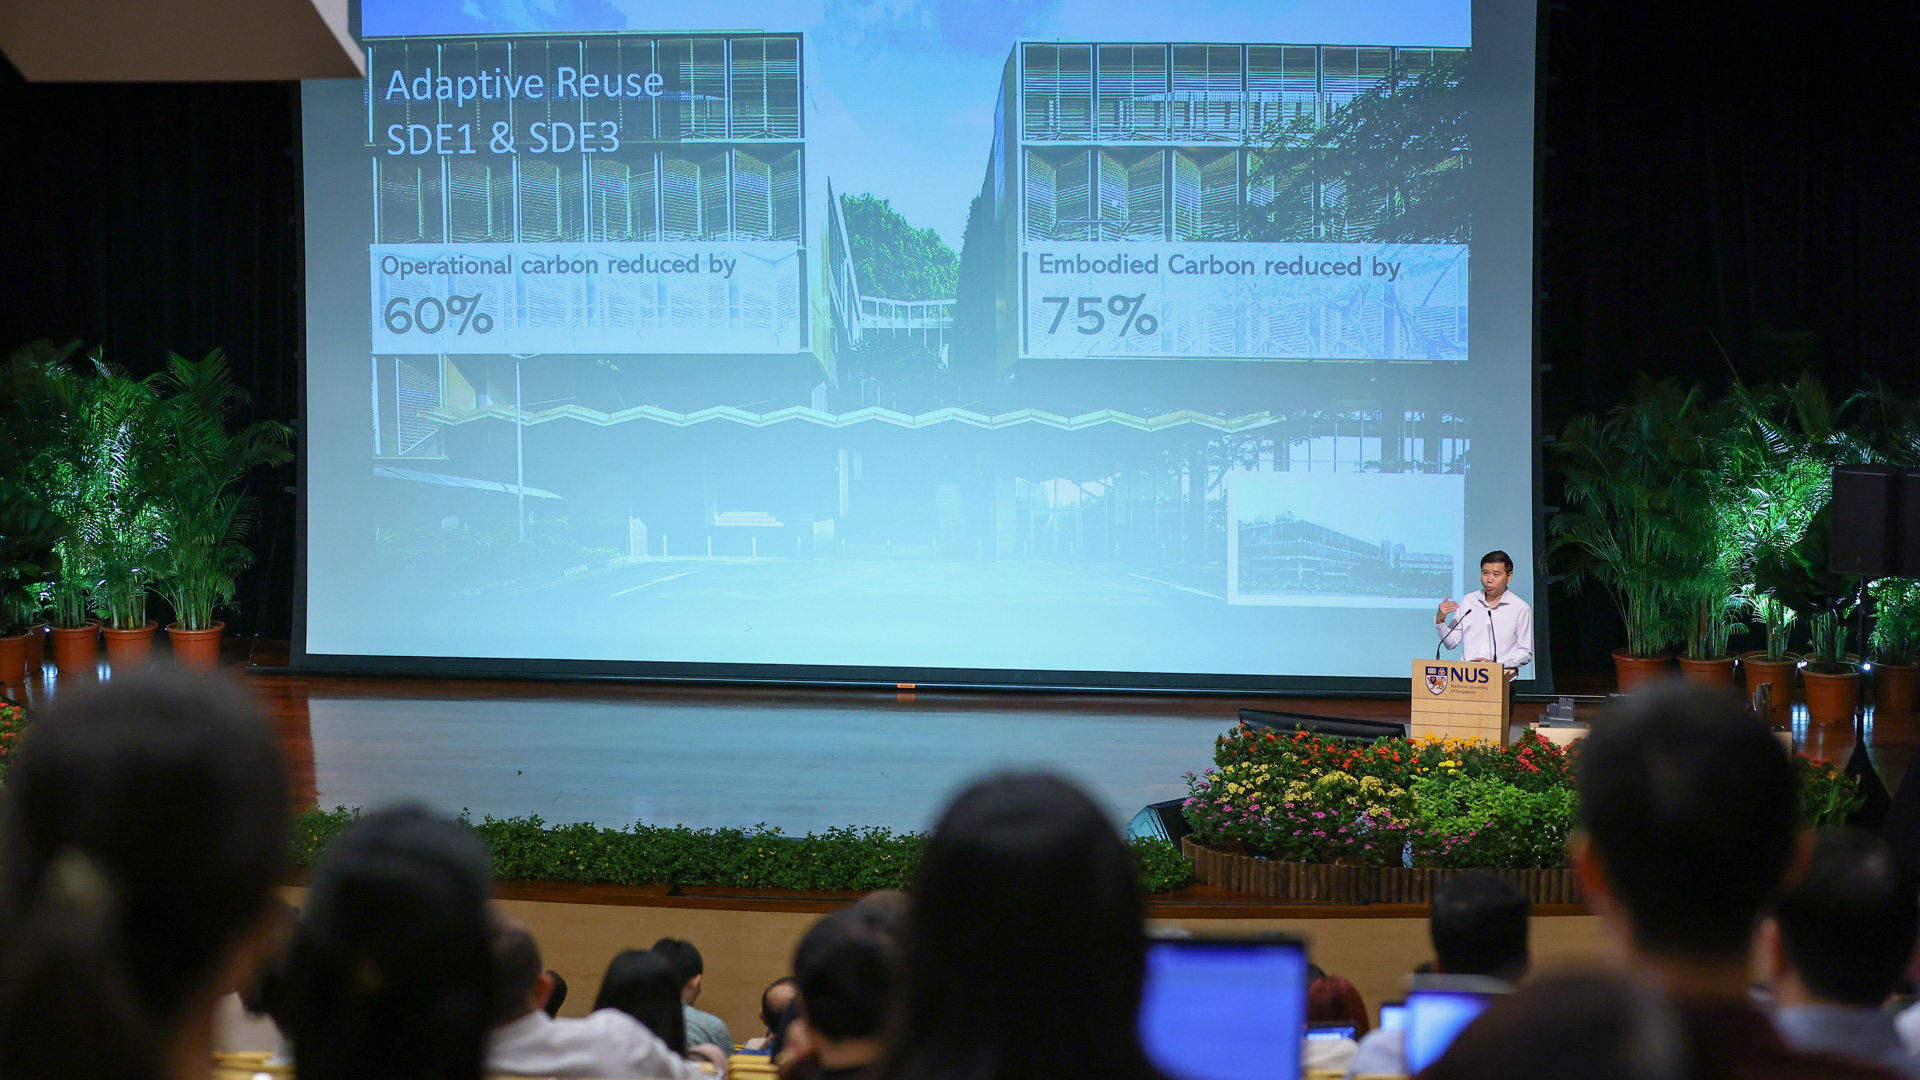 Keynote speaker Mr Koh Yan Leng, Vice President Campus Infrastructure at NUS, outlined ways that the science of sustainability was being applied across the university.